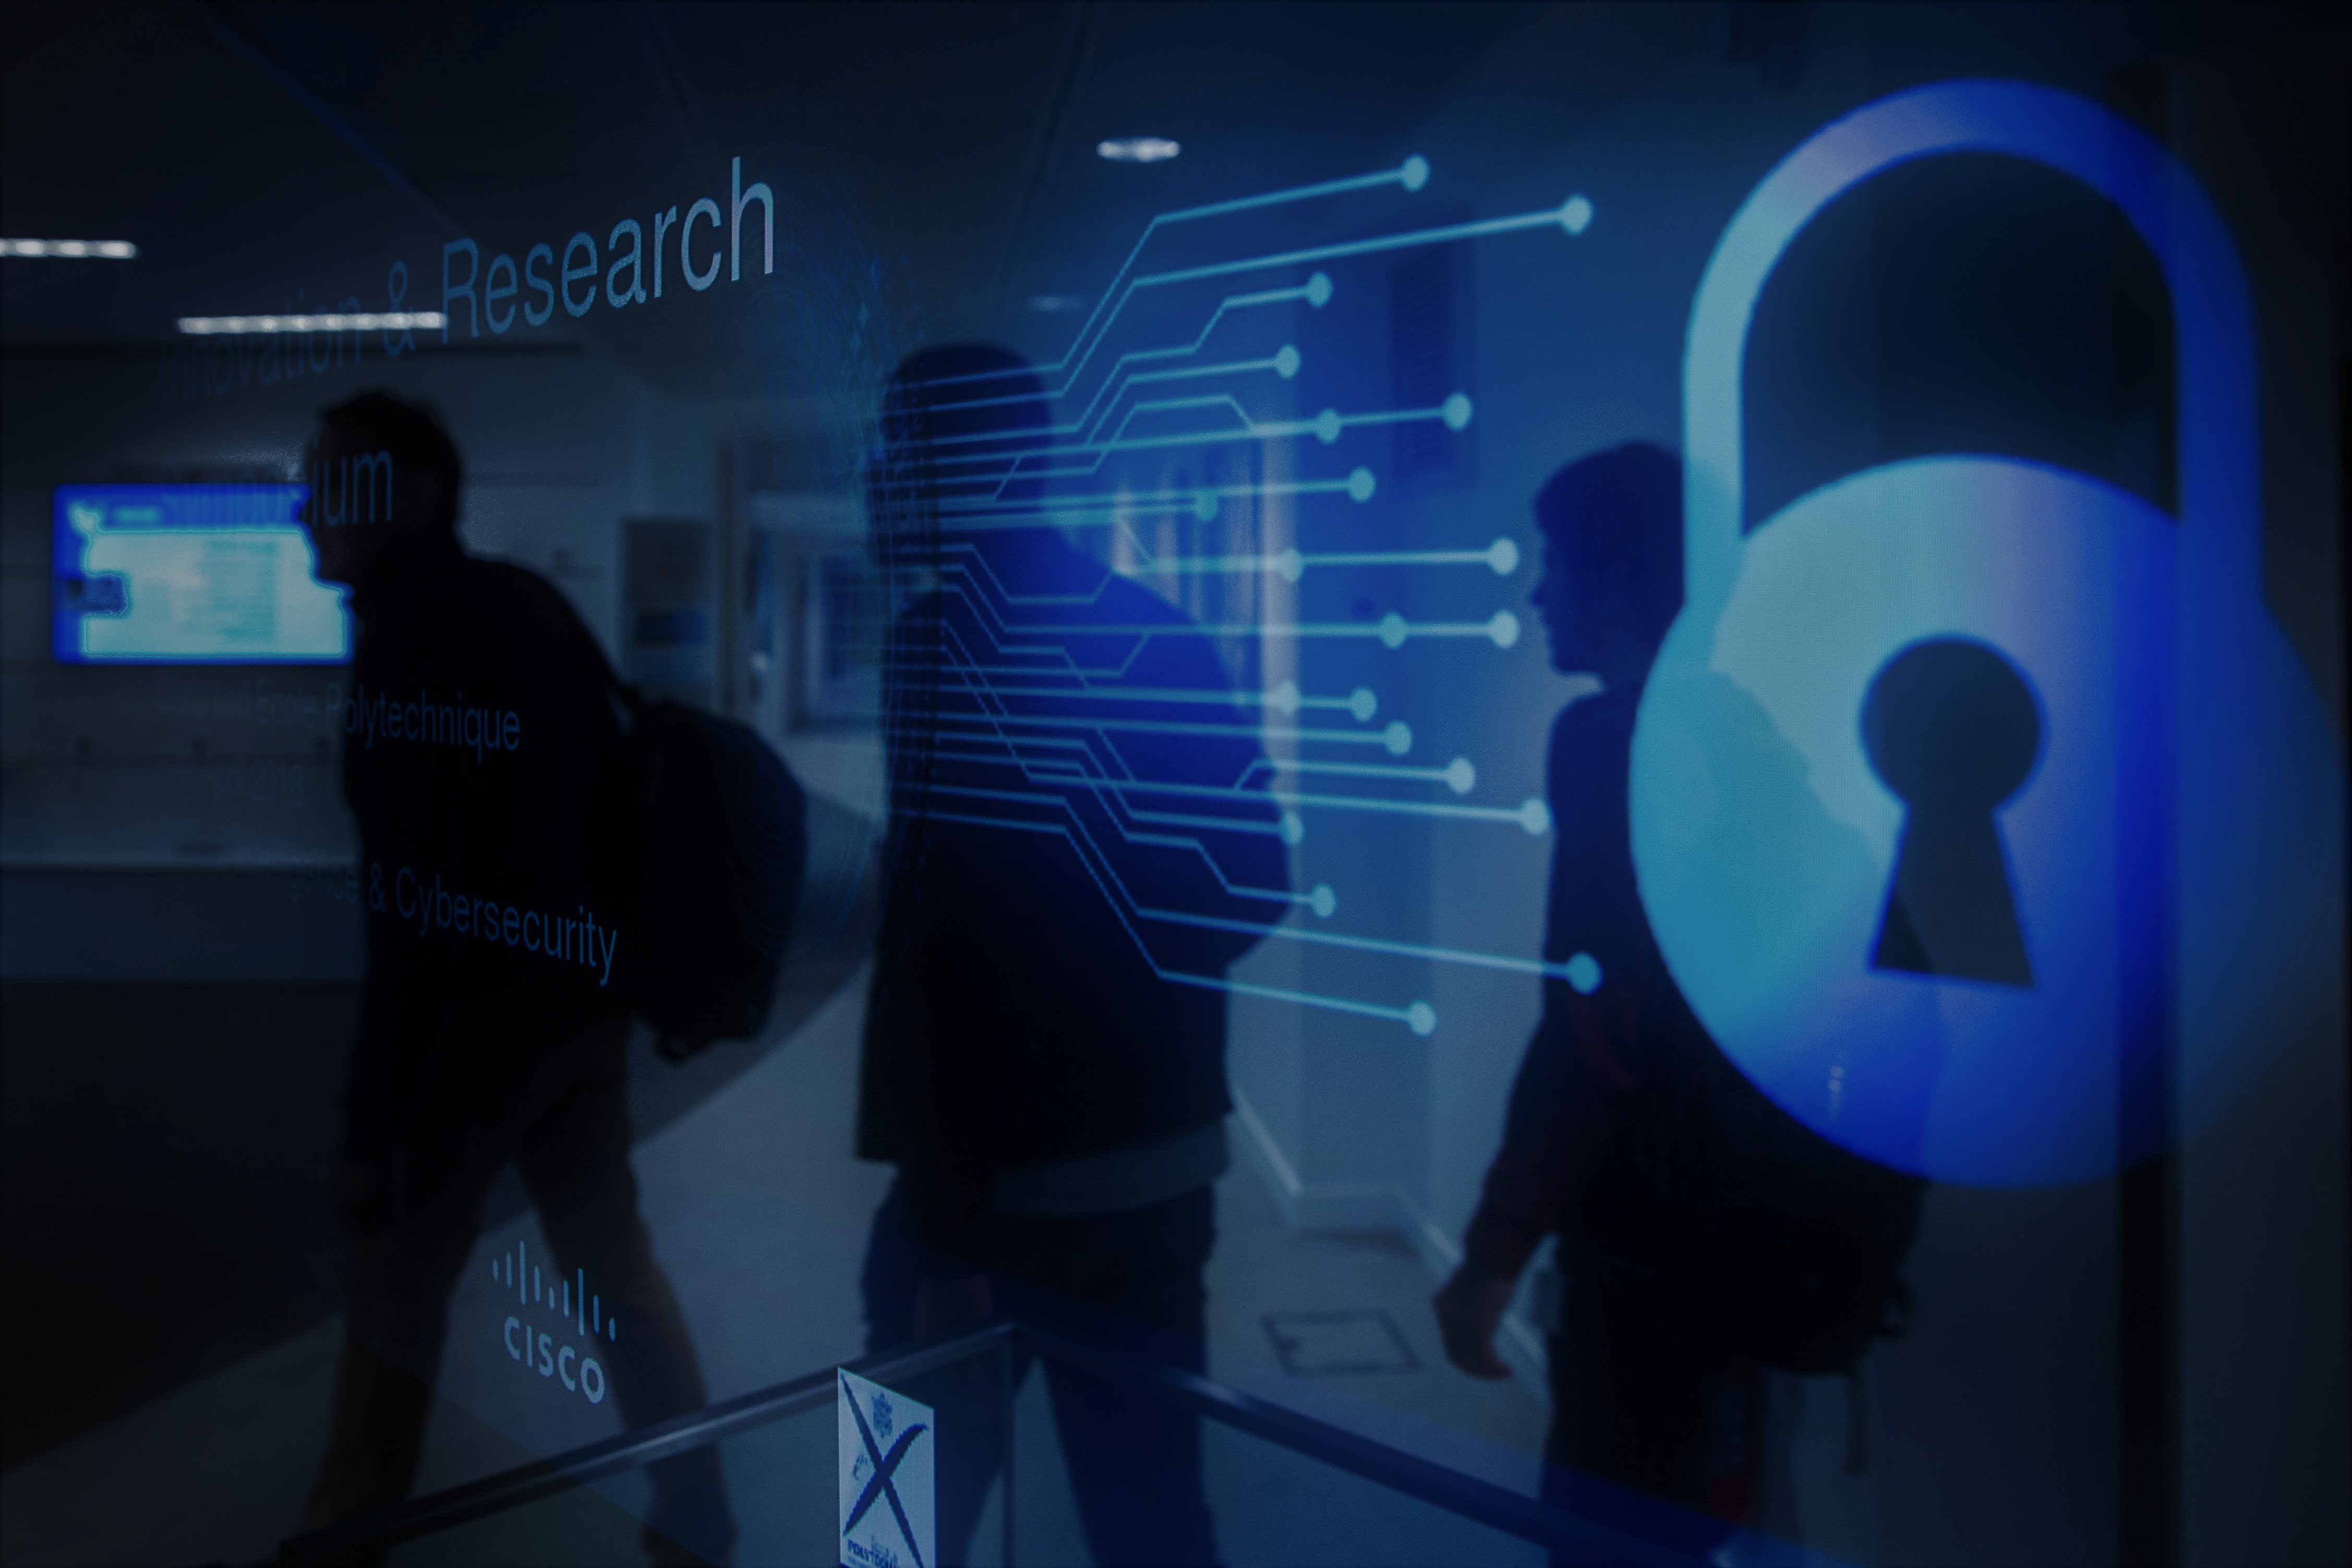 Innovation_&_Research_Symposium_Cisco_and_Ecole_Polytechnique_9-10_April_2018_Artificial_Intelligence_&_Cybersecurity_(40631791164)-min update